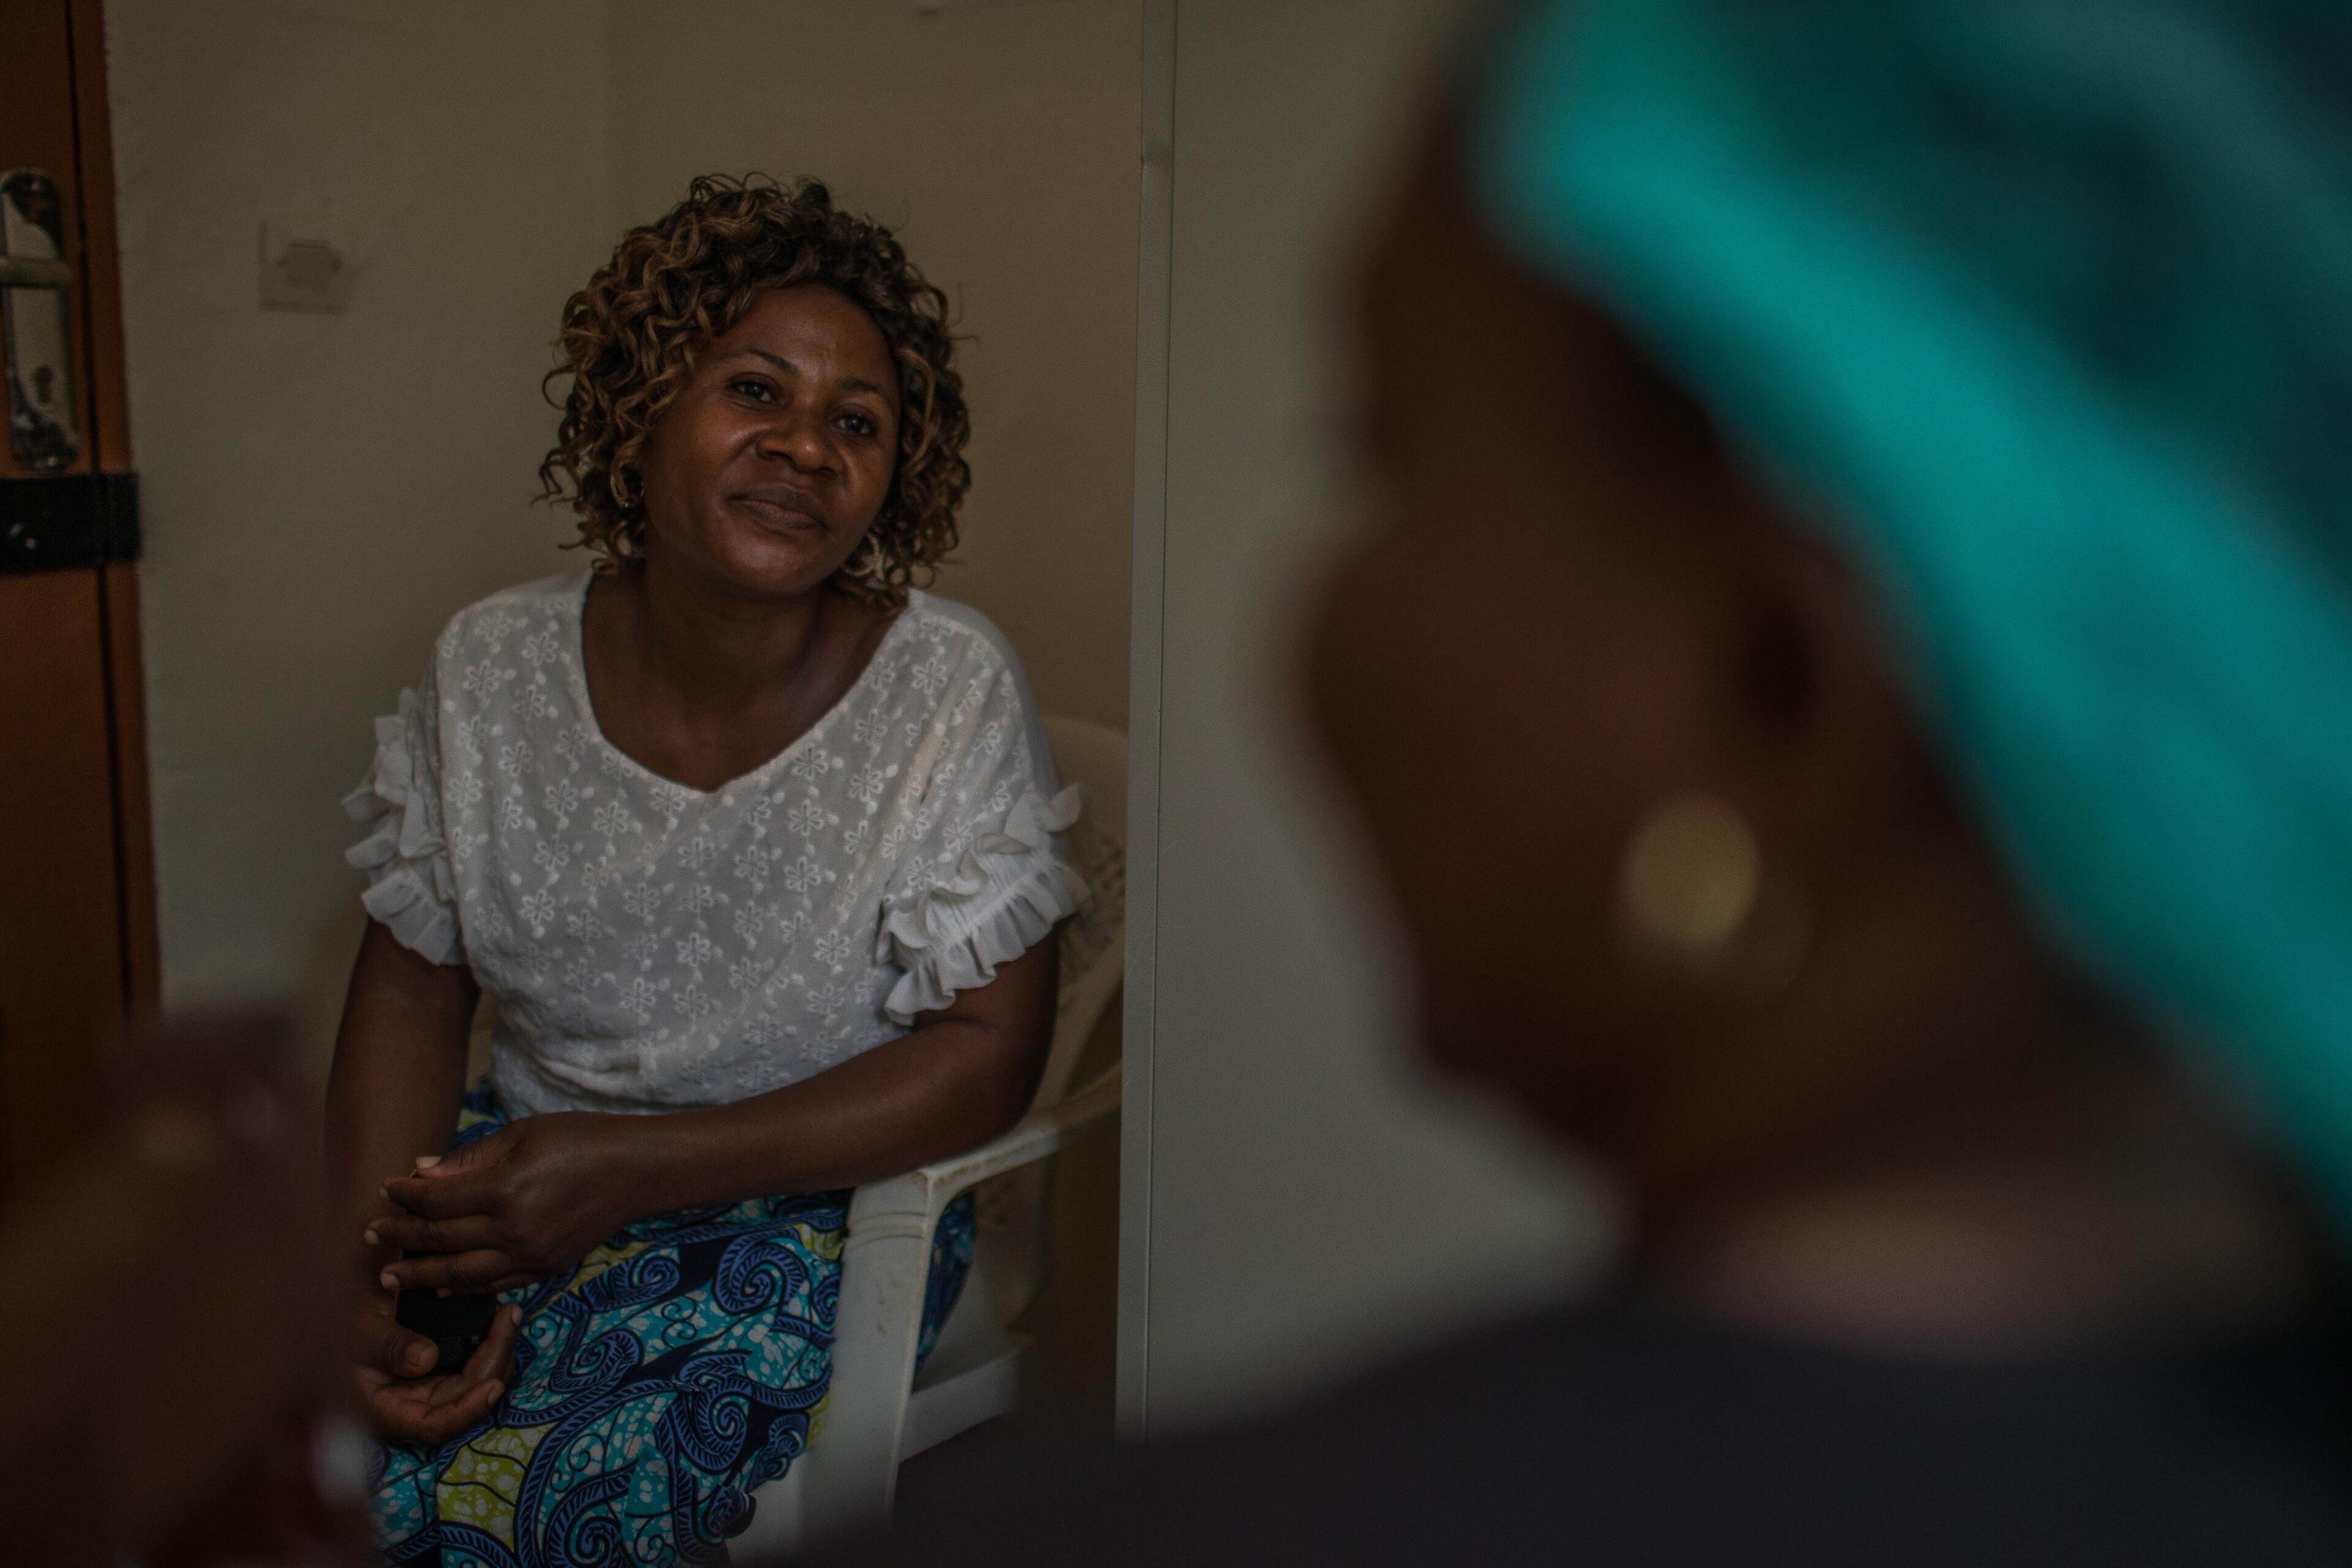 An Ebola survivor in Congo receives mental health support from International Rescue Committee staff member seated across from her.